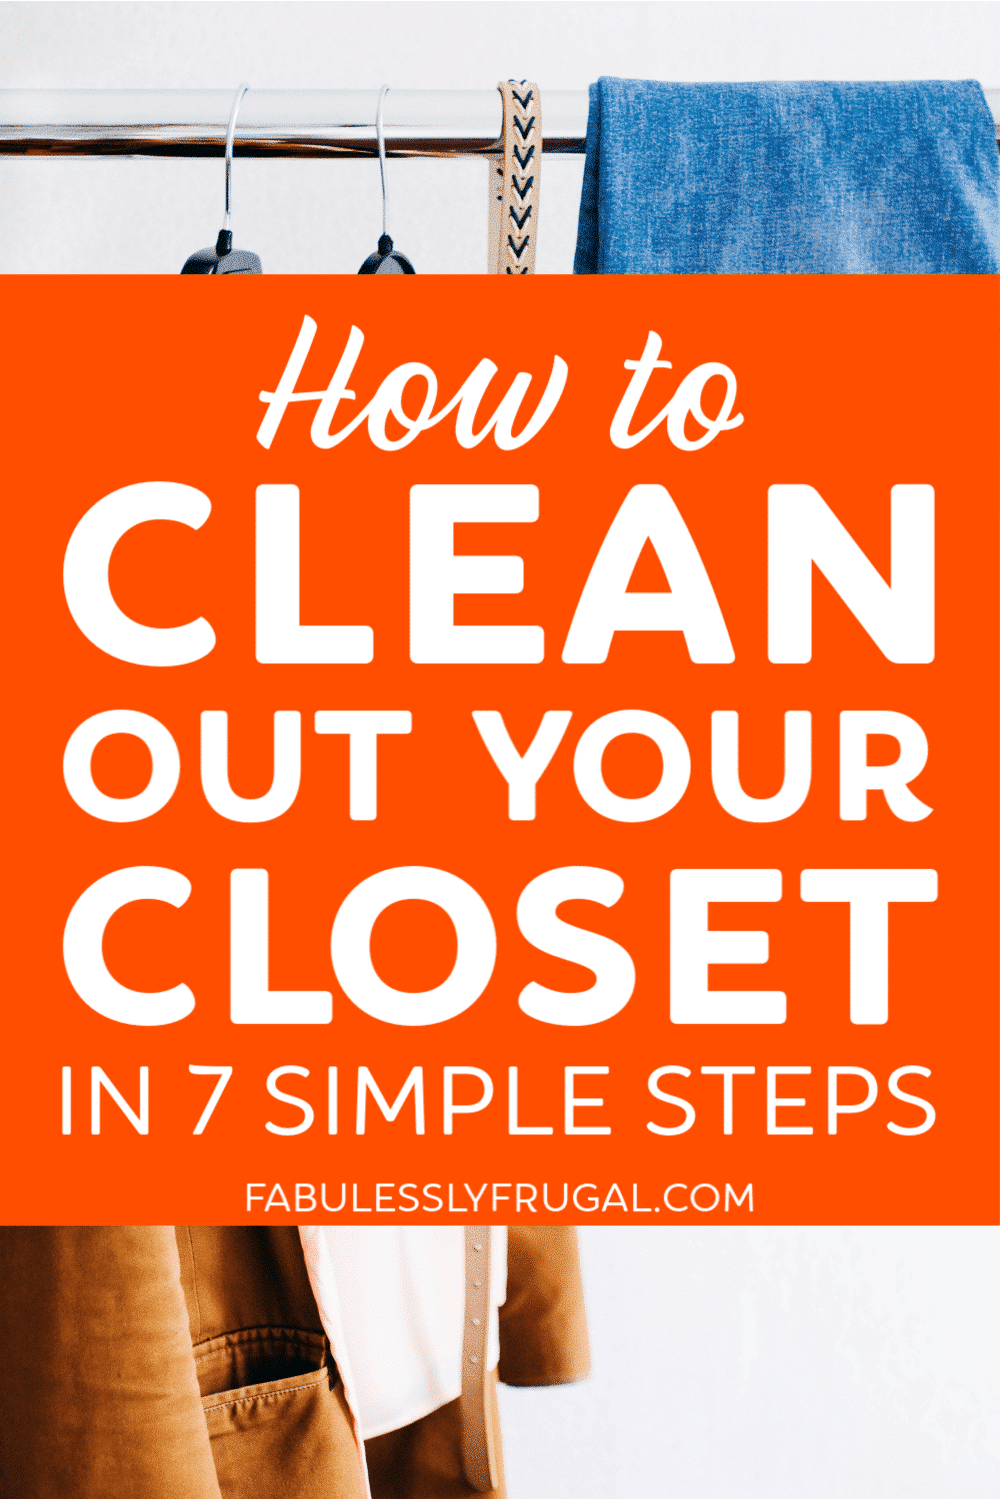 How to clean your closet